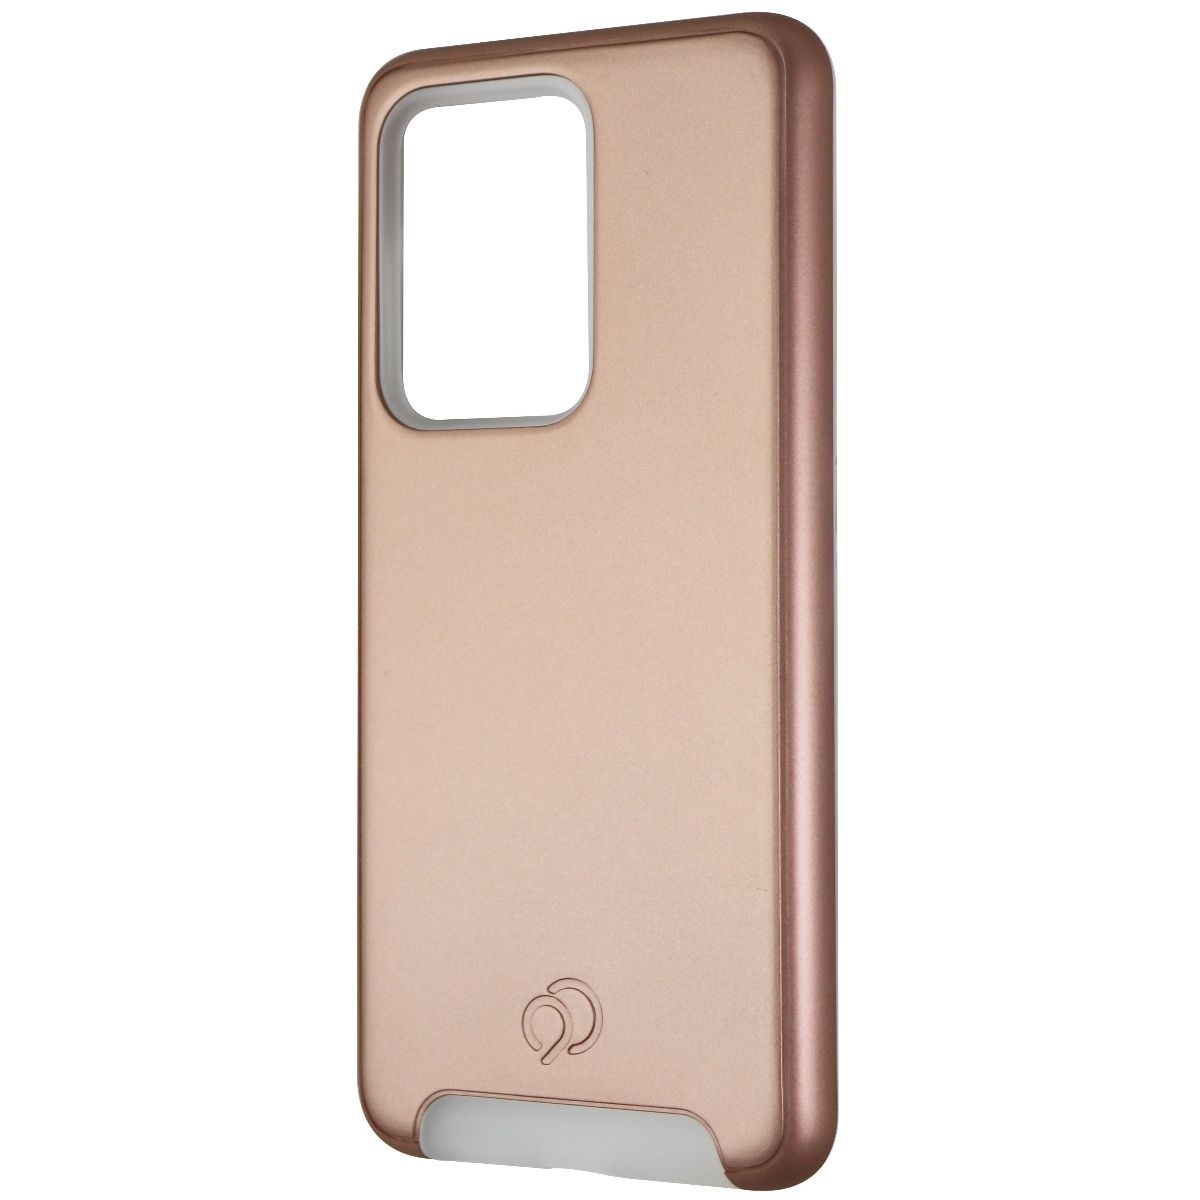 Nimbus9 Cirrus 2 Series Case For Samsung Galaxy S20 Ultra - Rose Pink / Frost